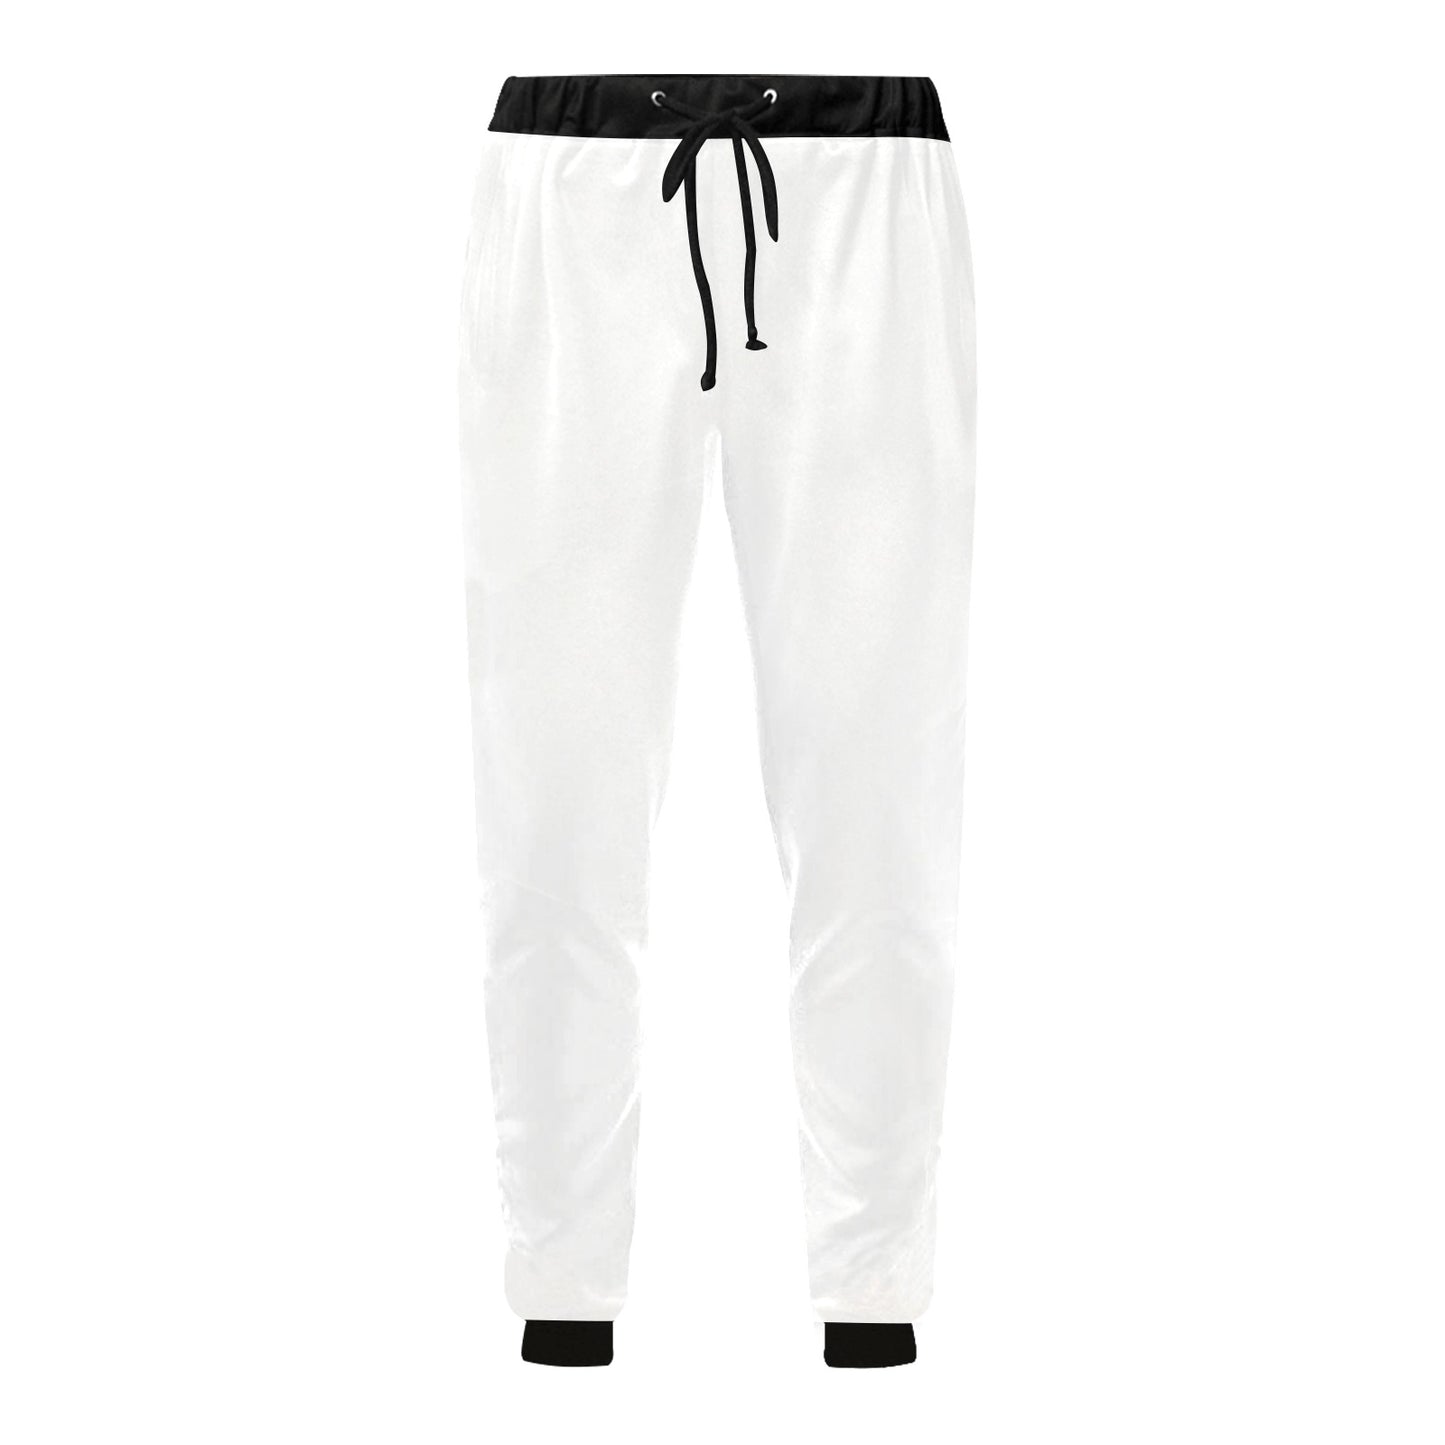 RR Worlwide Men's Joggers Blk/Wht/Gld - Matching jacket and tank sold separately.